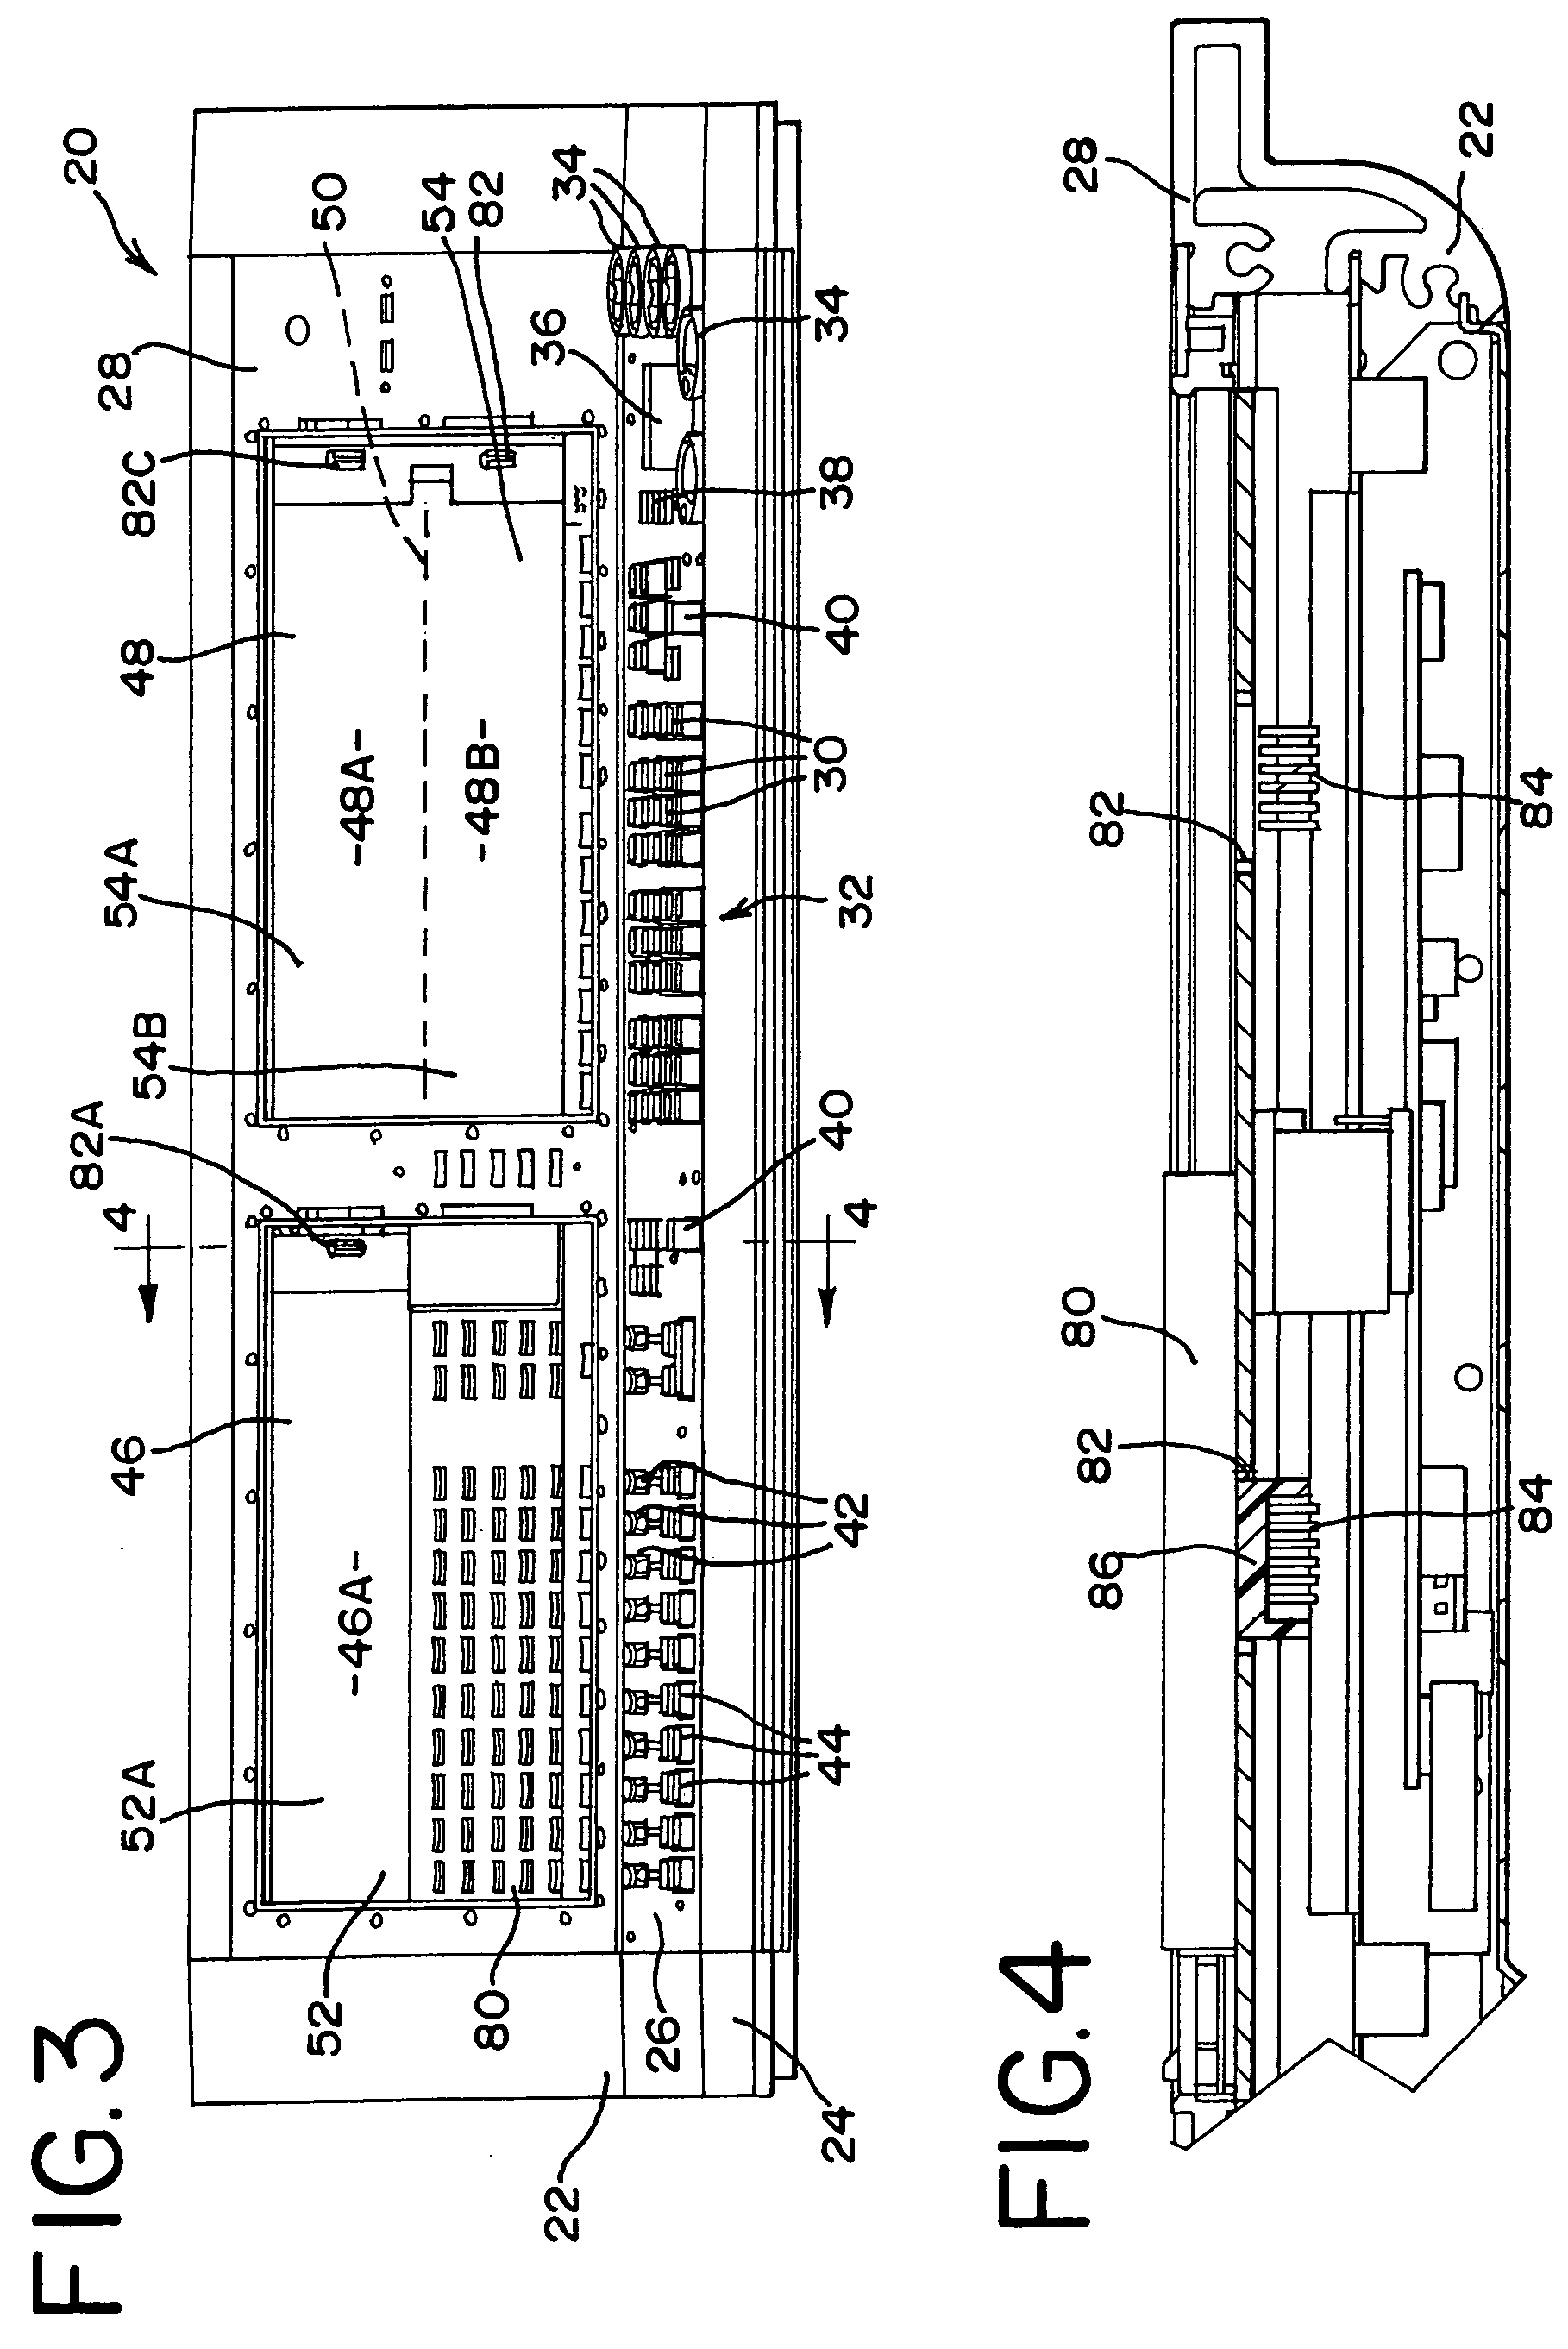 Segmented touch screen console with module docking